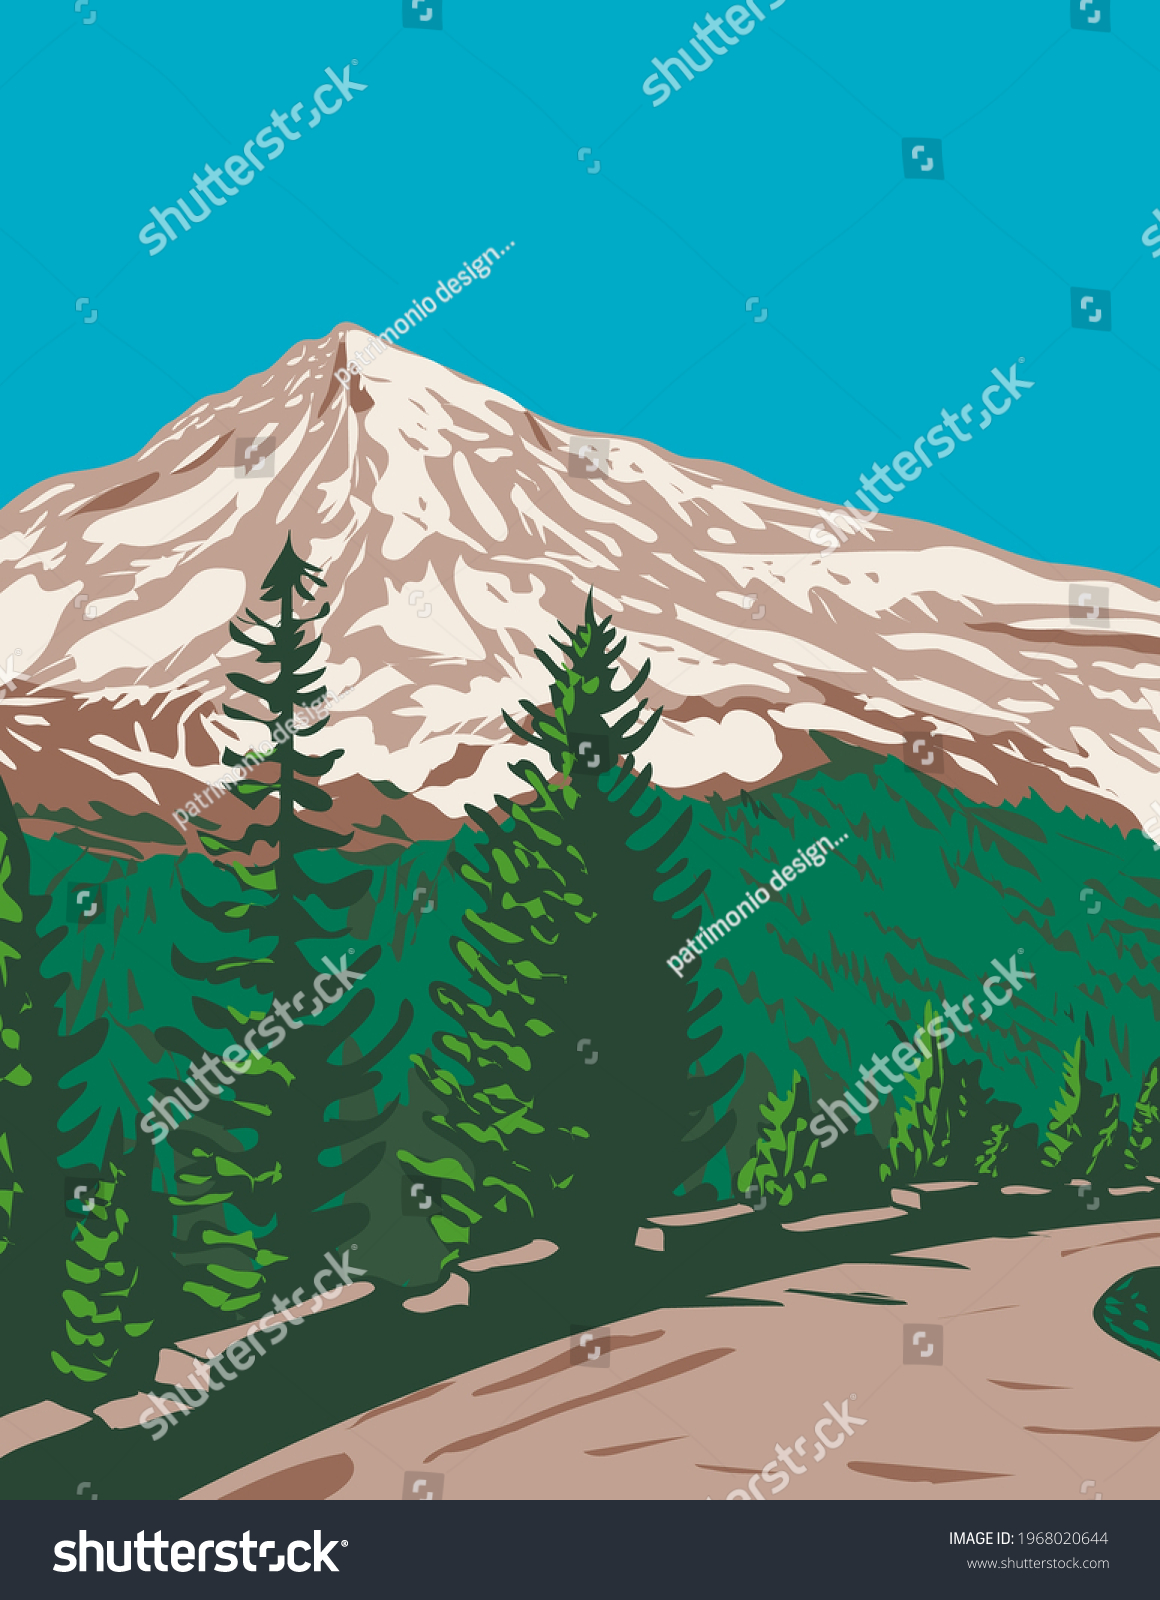 SVG of South Face of Mount Rainier Tahoma or Tacoma with Kautz Ice Cliff Located in Mount Rainier National Park Washington State WPA Poster Art svg